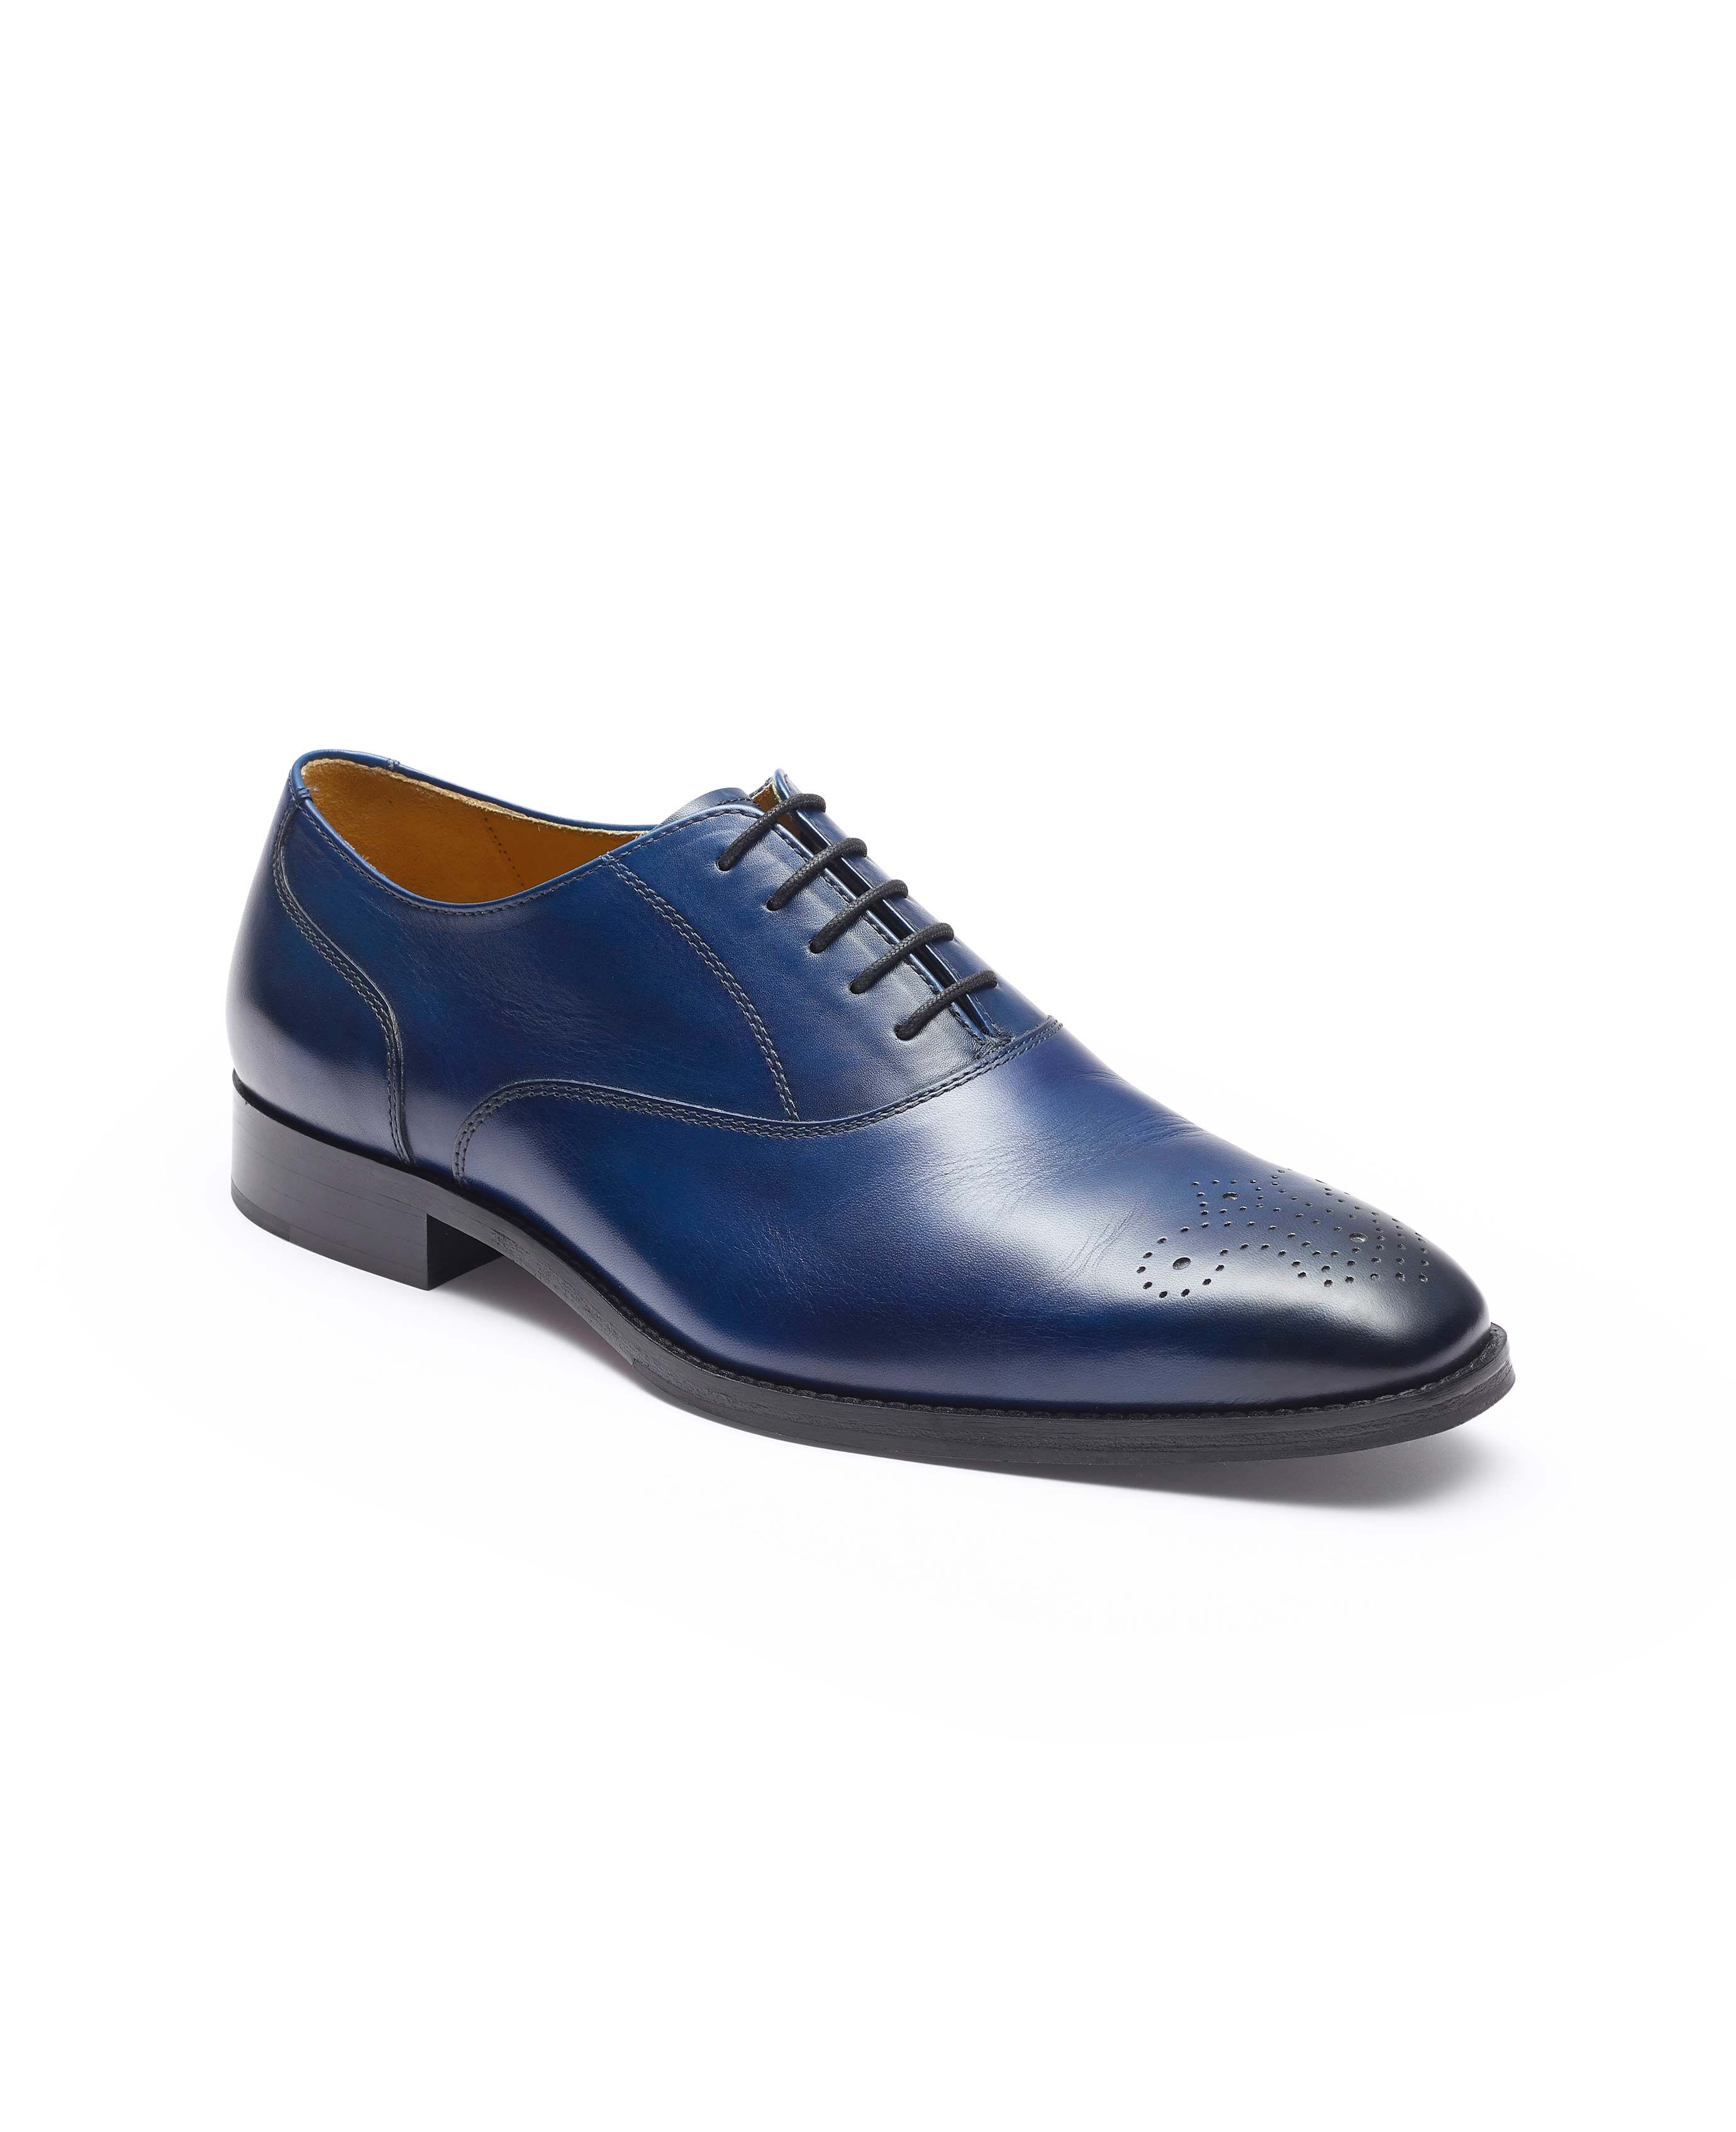 Men’s Blue Leather Hand-Painted Oxford Shoes | Savile Row Co